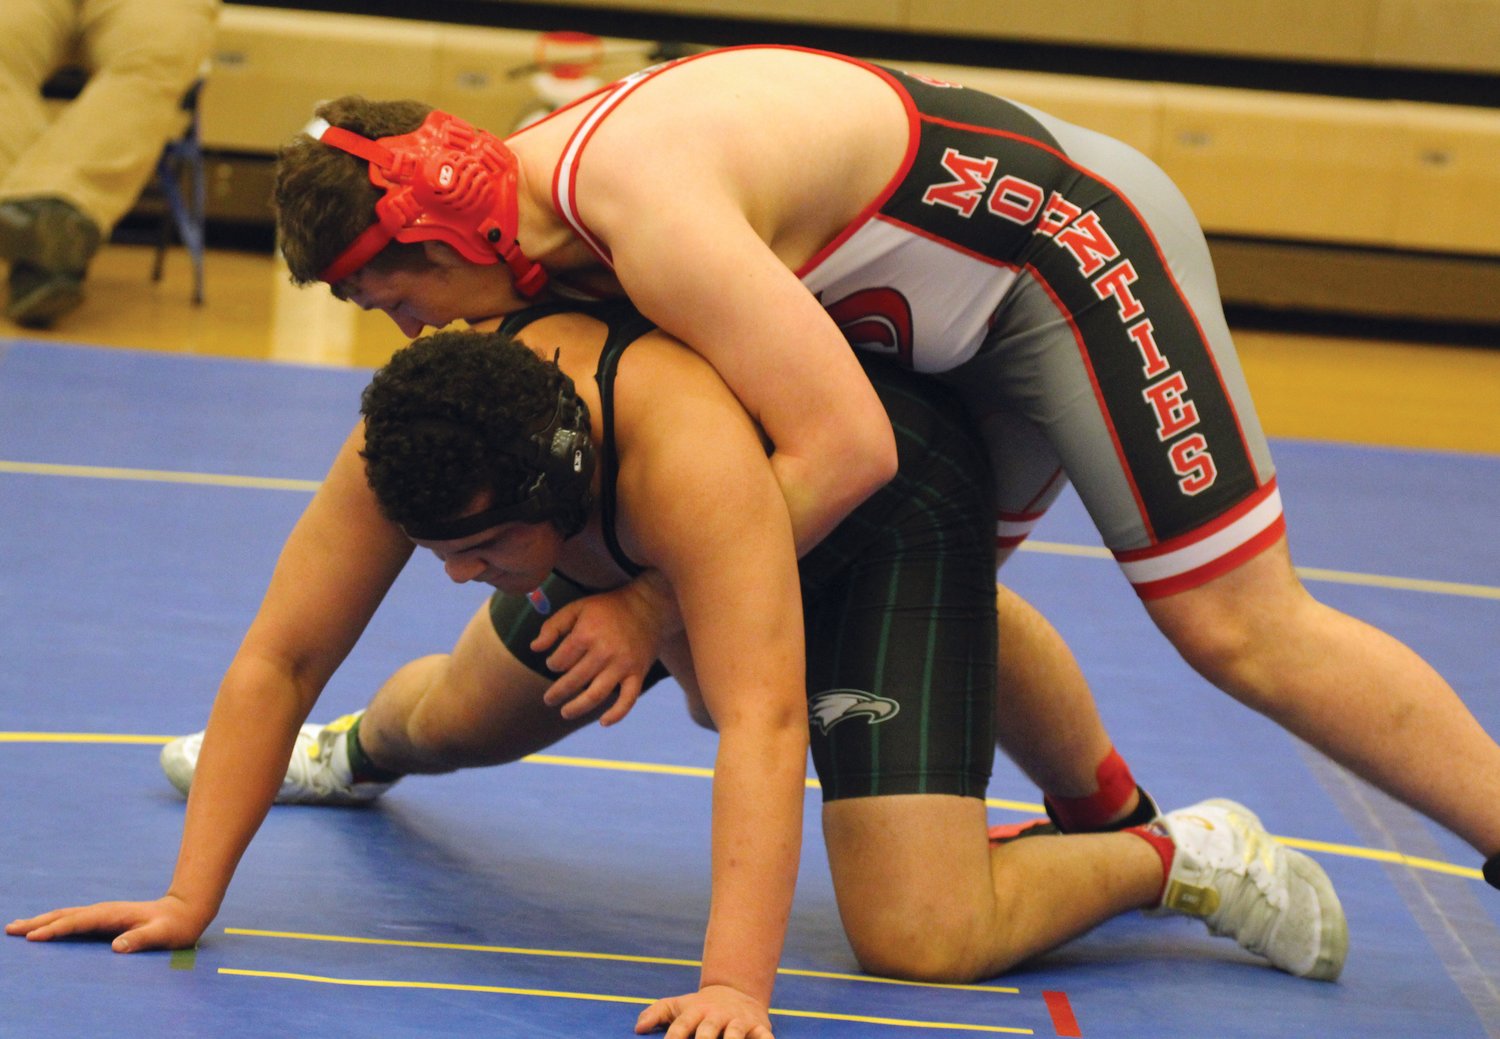 Southmont's Zayden Dunn defeated Zionsville's Ben Jones 7-5 to claim the title at 285.